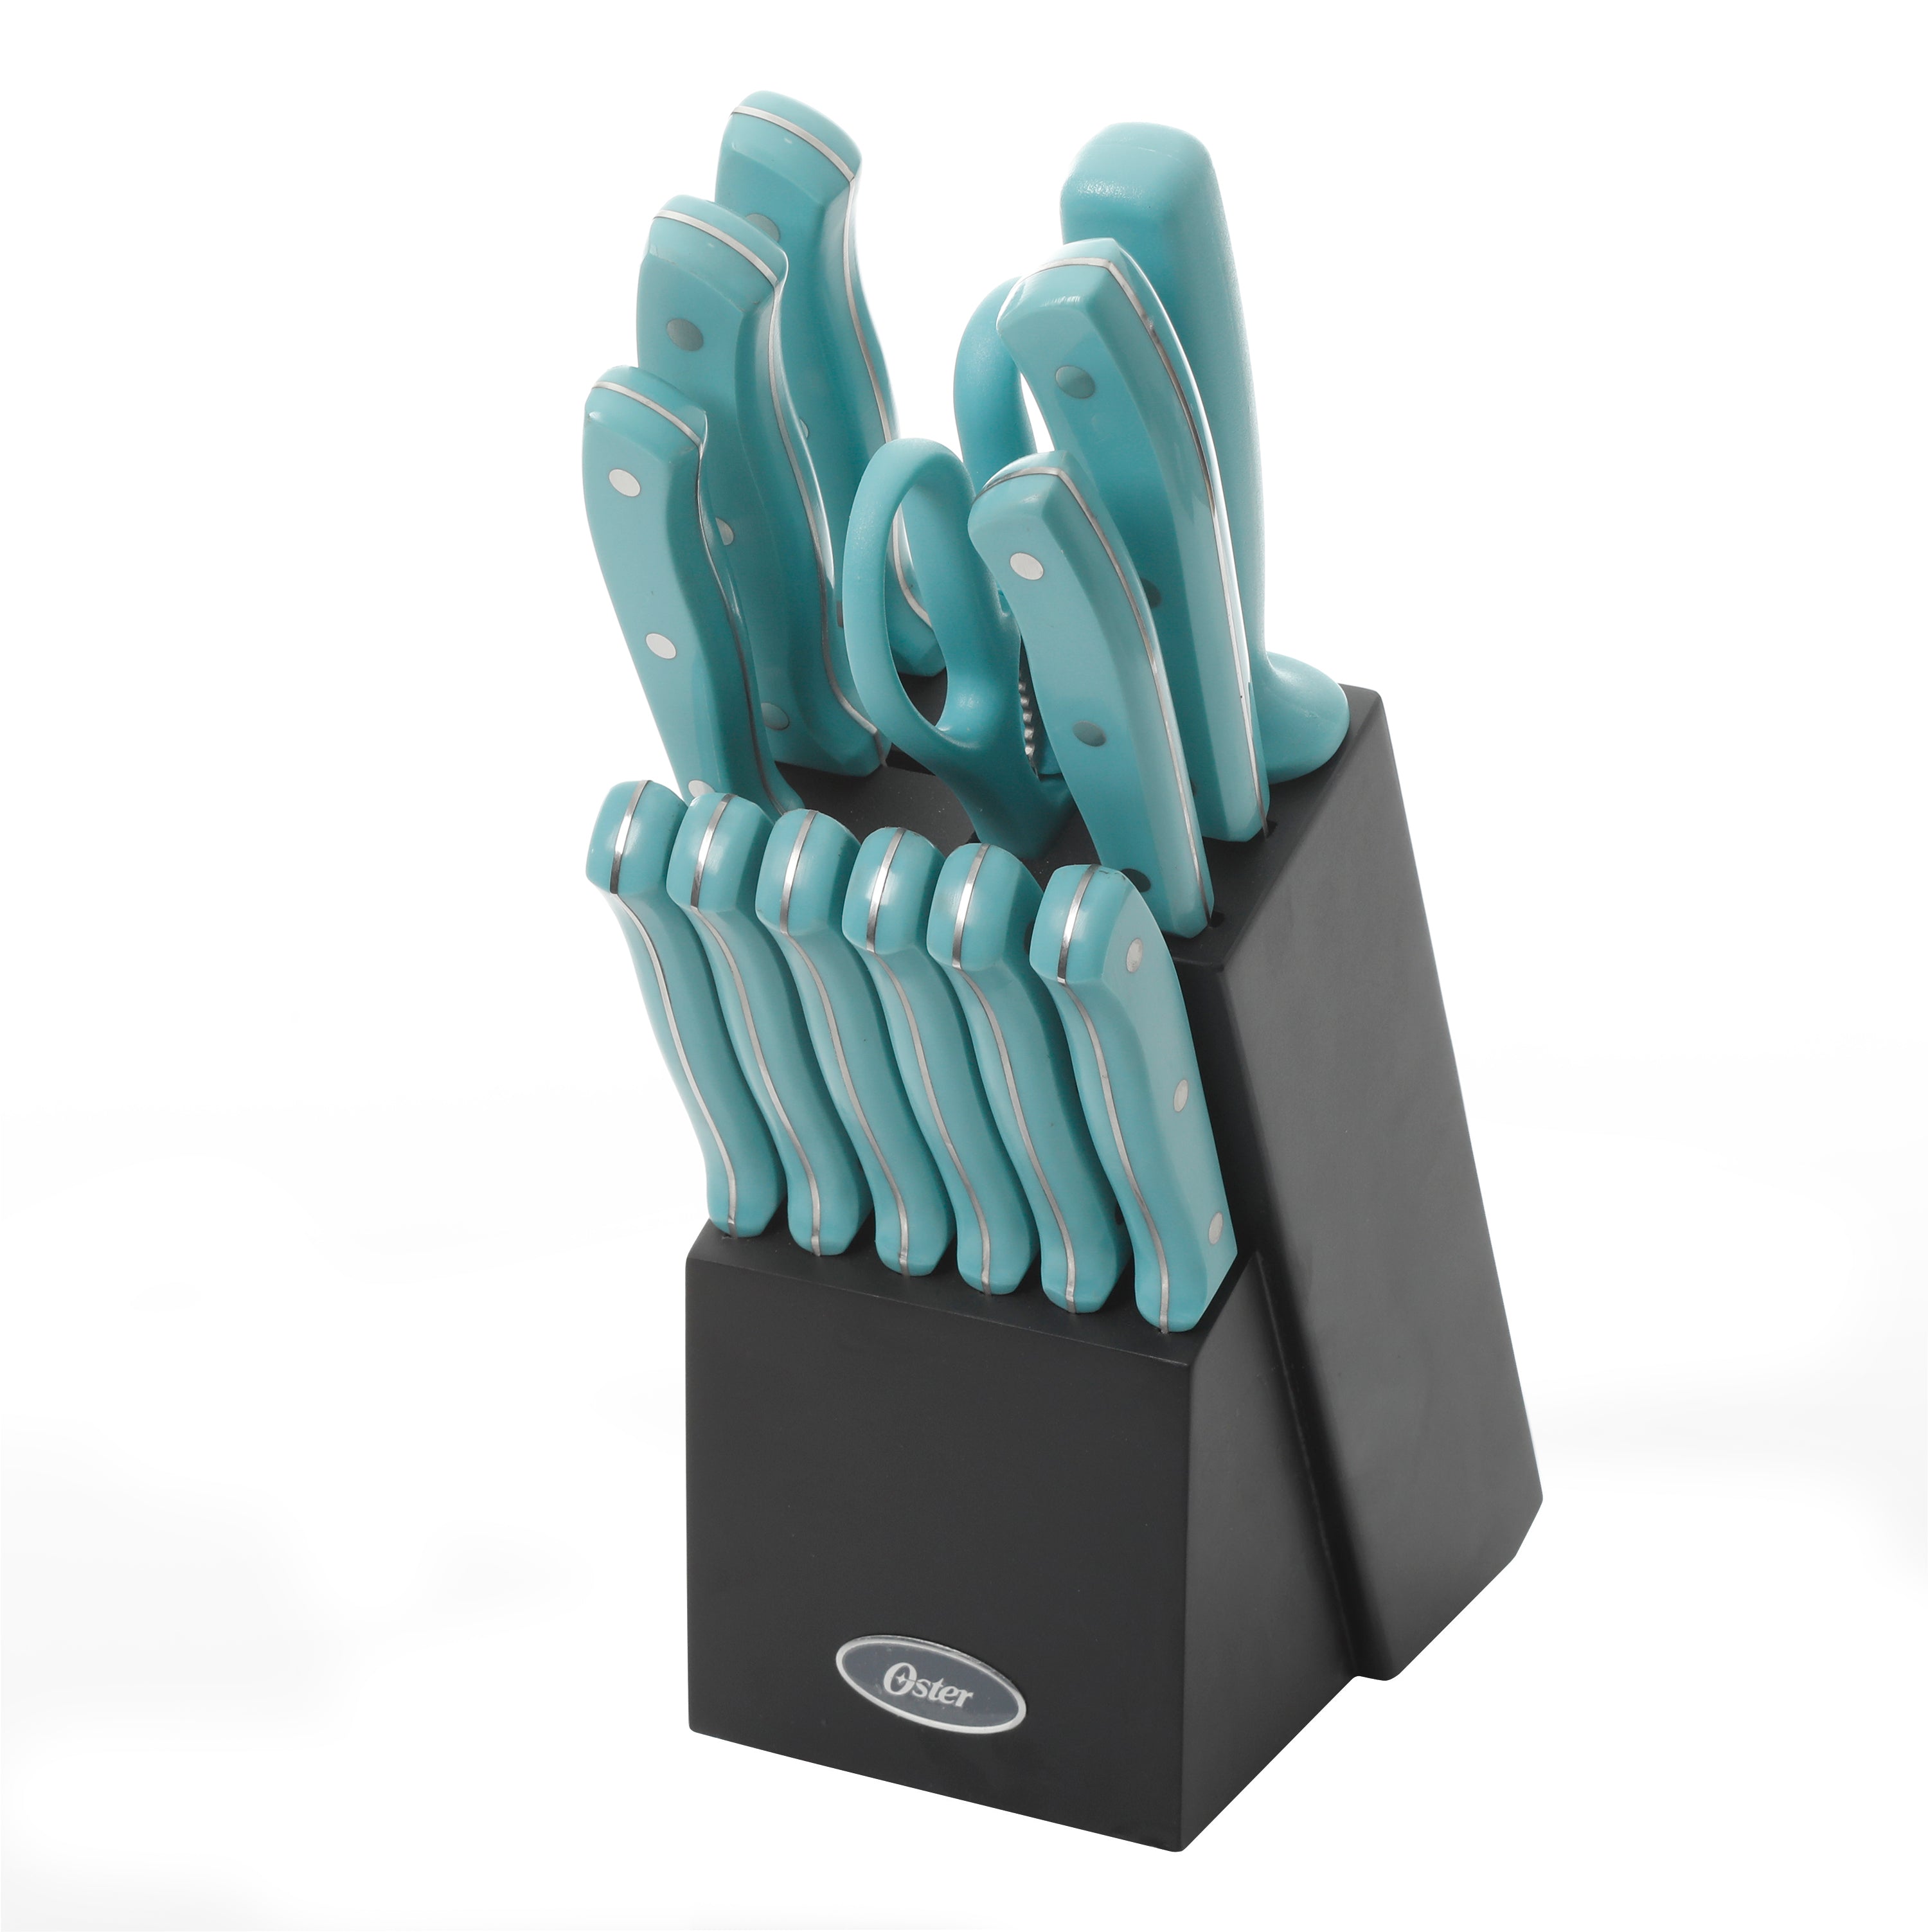 Oster Evansville 14 Piece Stainless Steel Cutlery Set in Light Blue